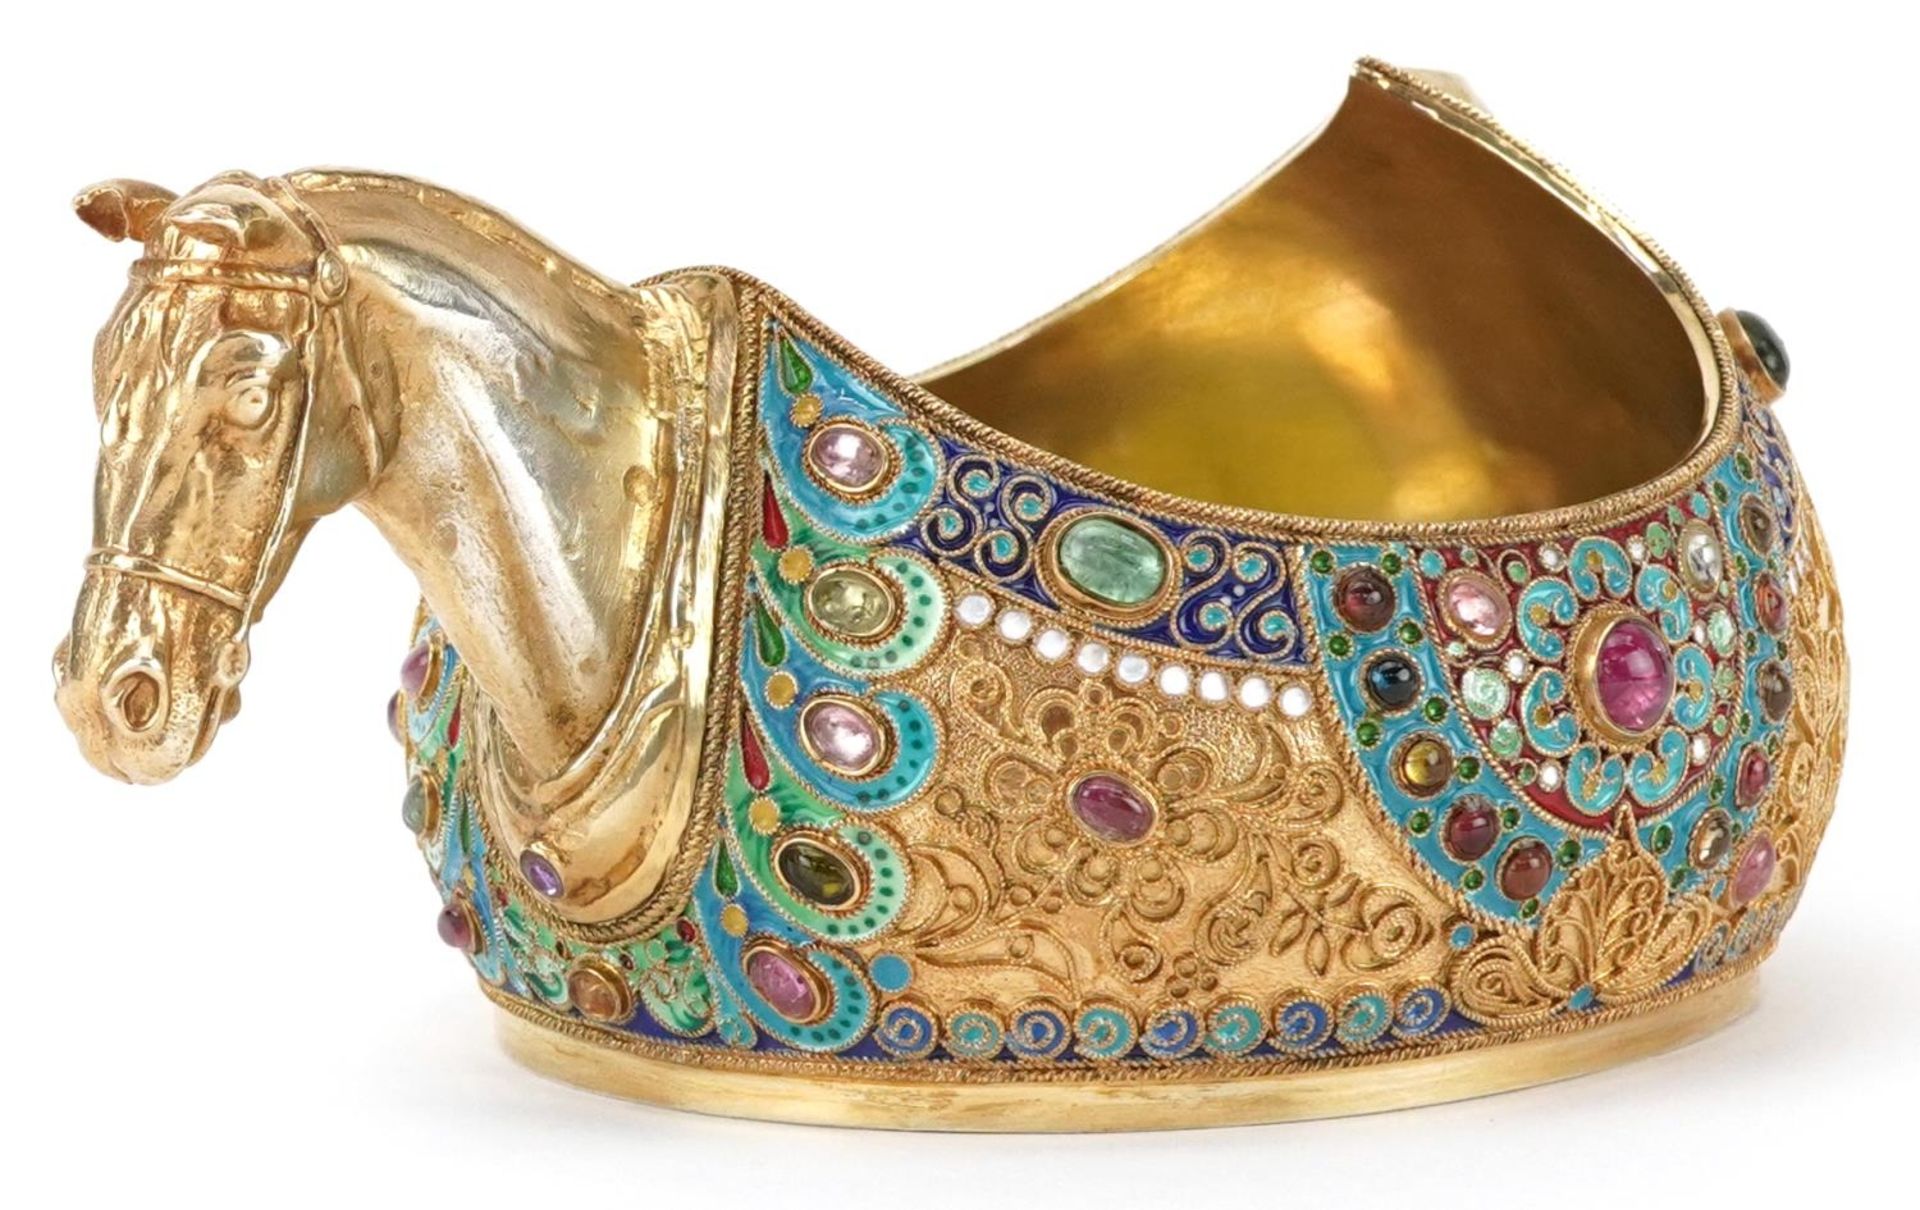 Silver gilt champleve enamel kovsh having a horsehead design handle and set with colourful